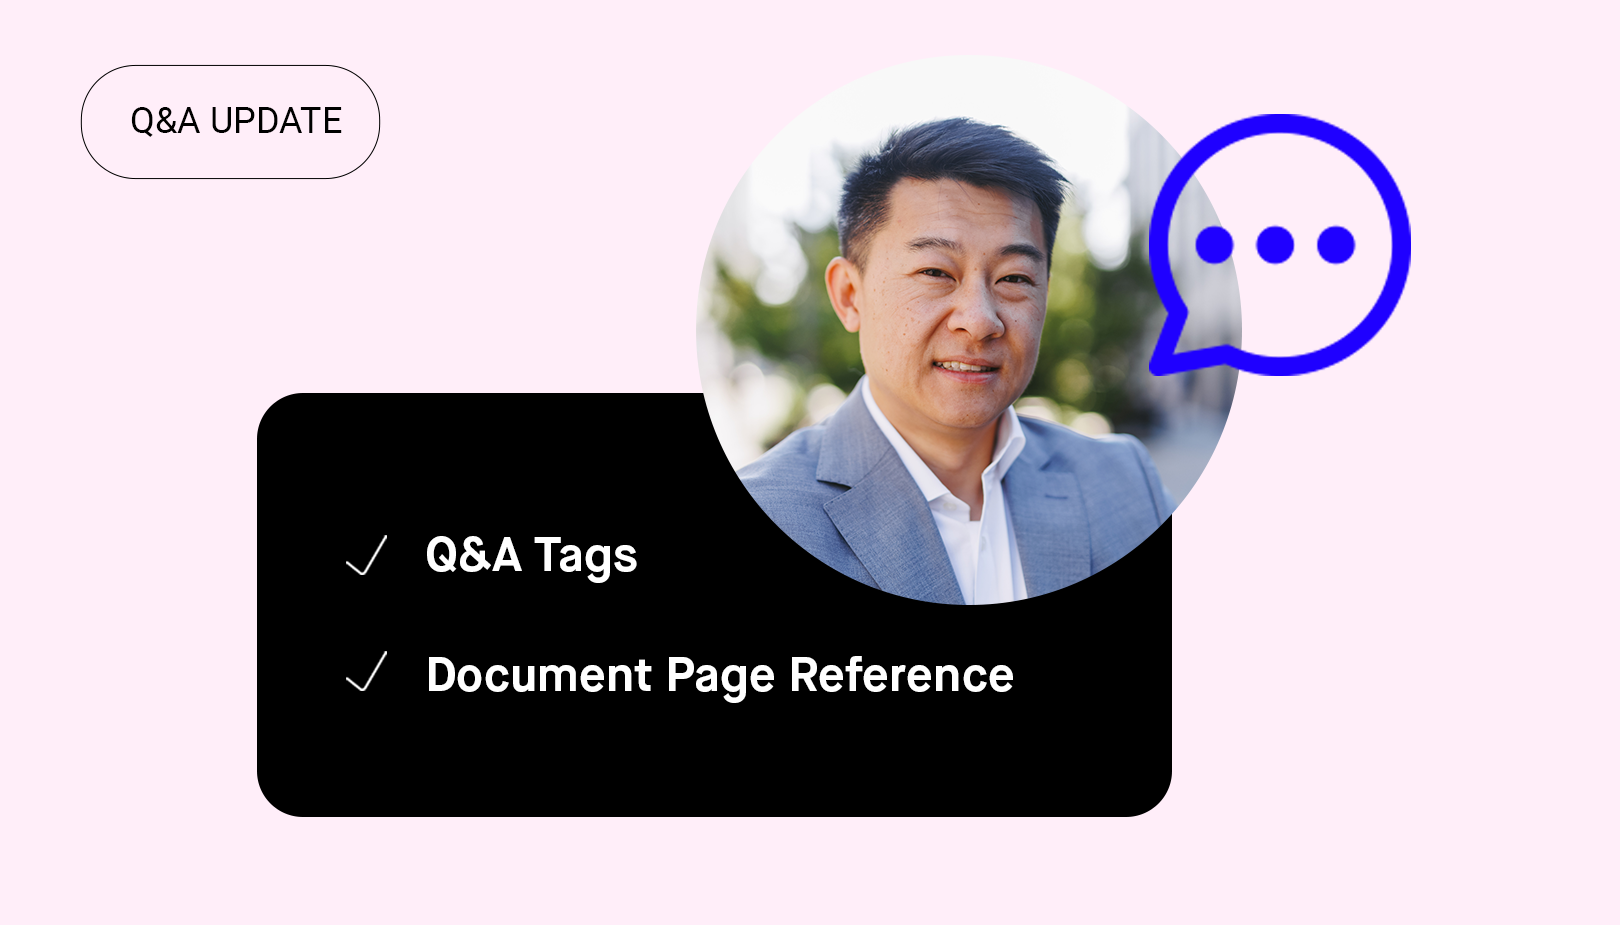 Q&A Release: Page Reference & Tags